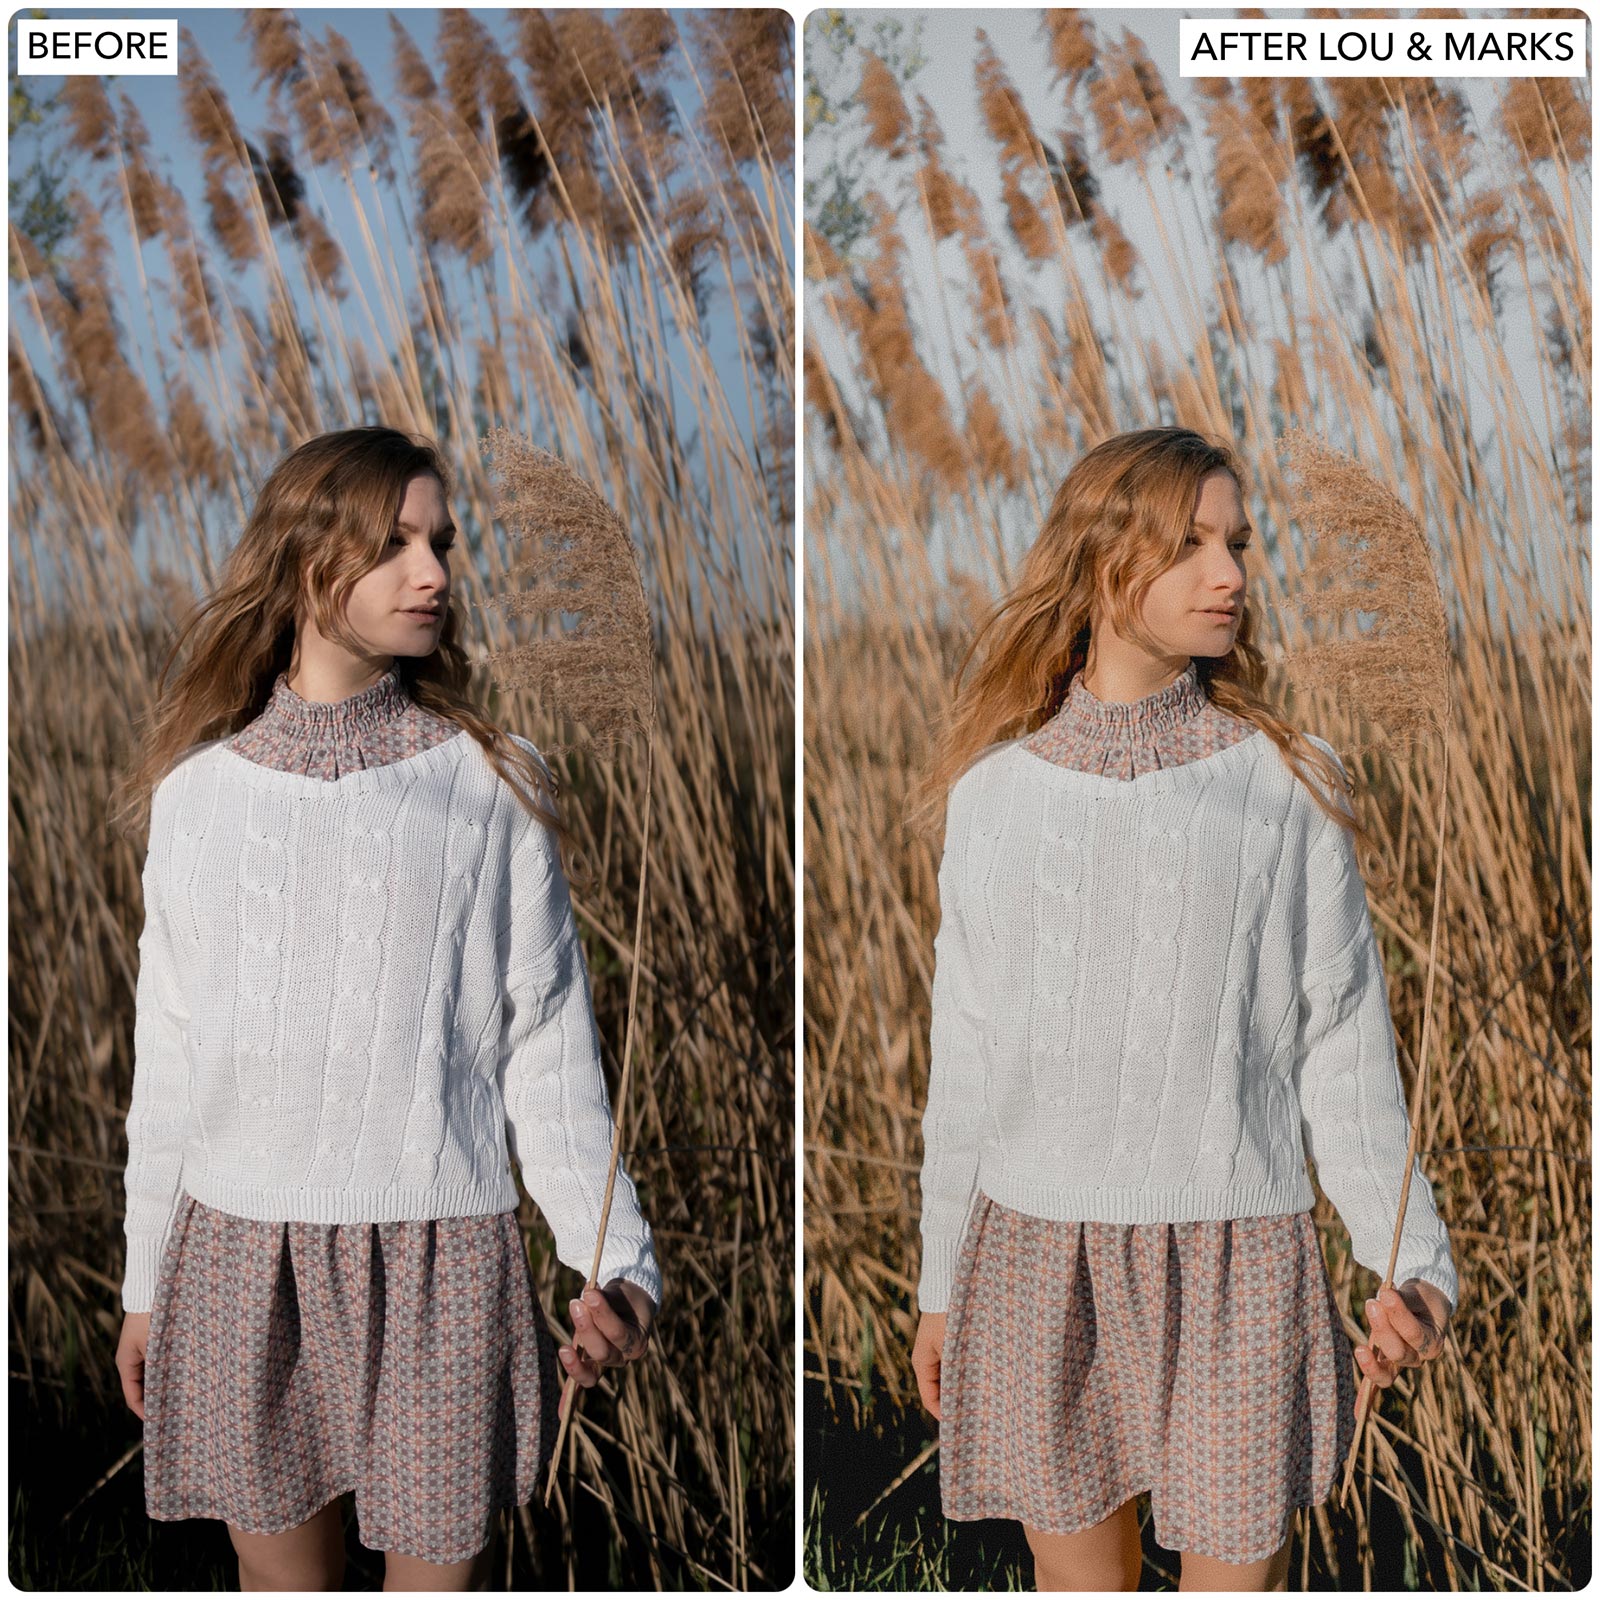 Creamy Film Filter For Adobe Lightroom Presets By Lou And Marks Presets Outdoor